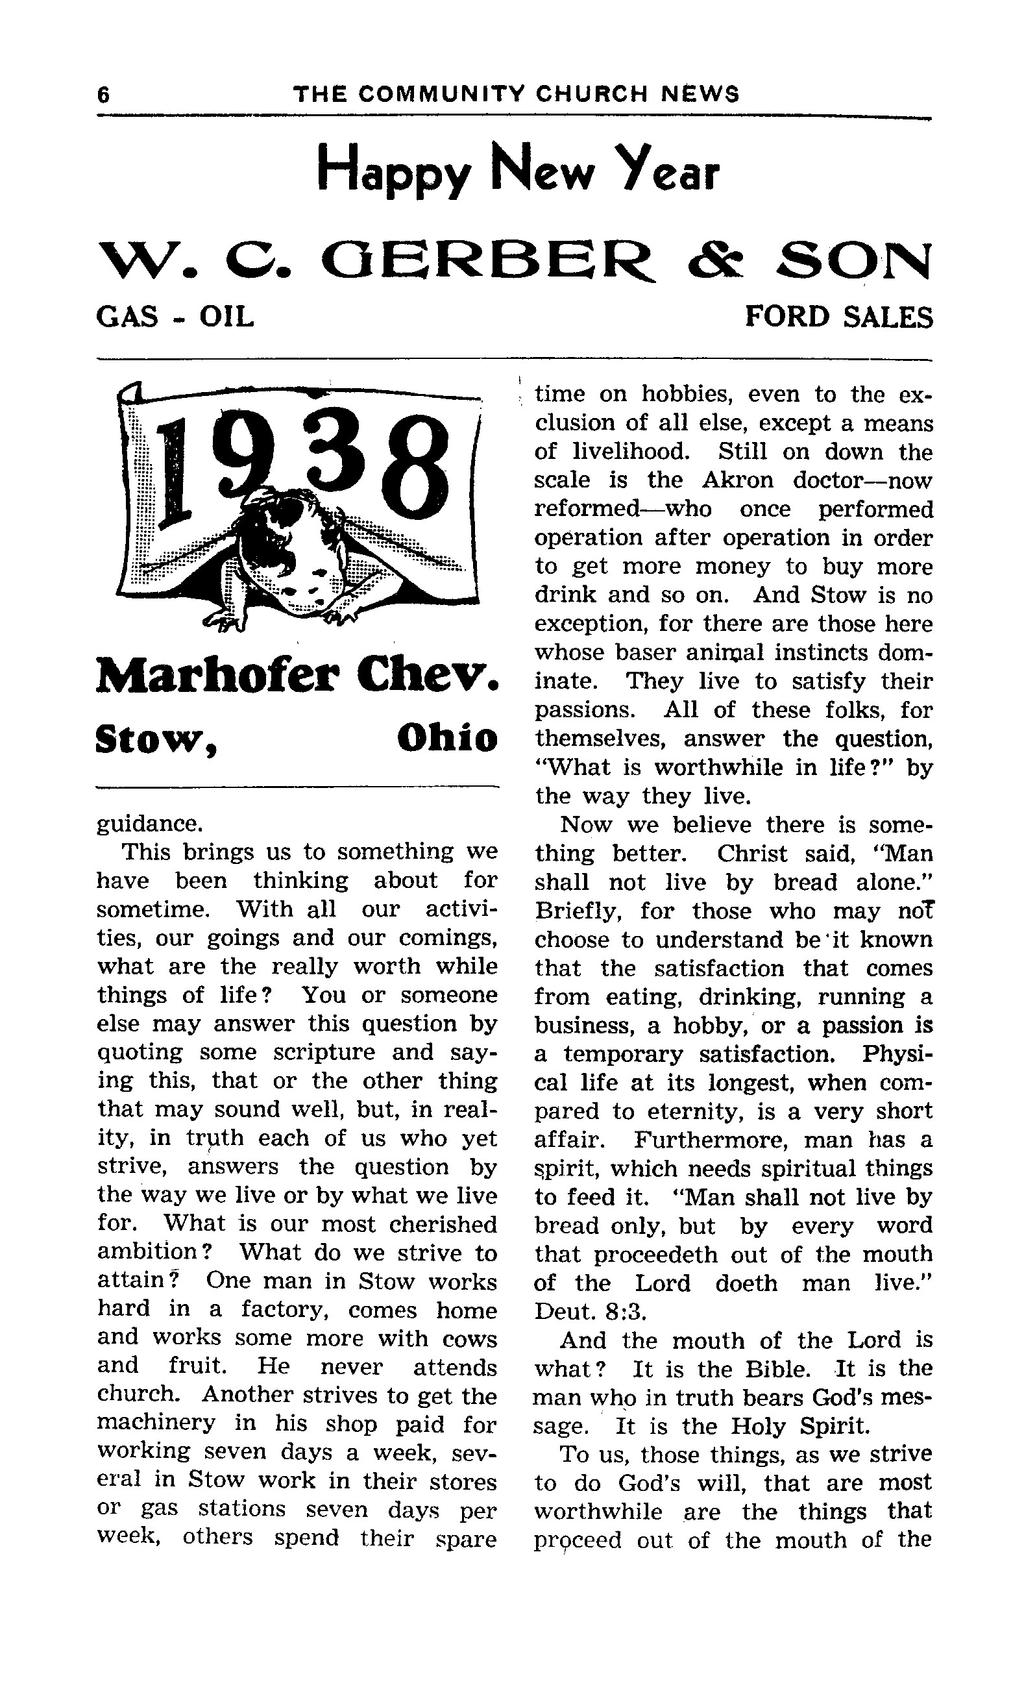 6 THE COMMUNITY CHURCH NEWS Happy New Year W. C. GERBER & SON GAS - OIL FORD SALES Marhofer Chev. Stow, Ohio guidance. This brings us to something we have been thinking about for sometime.